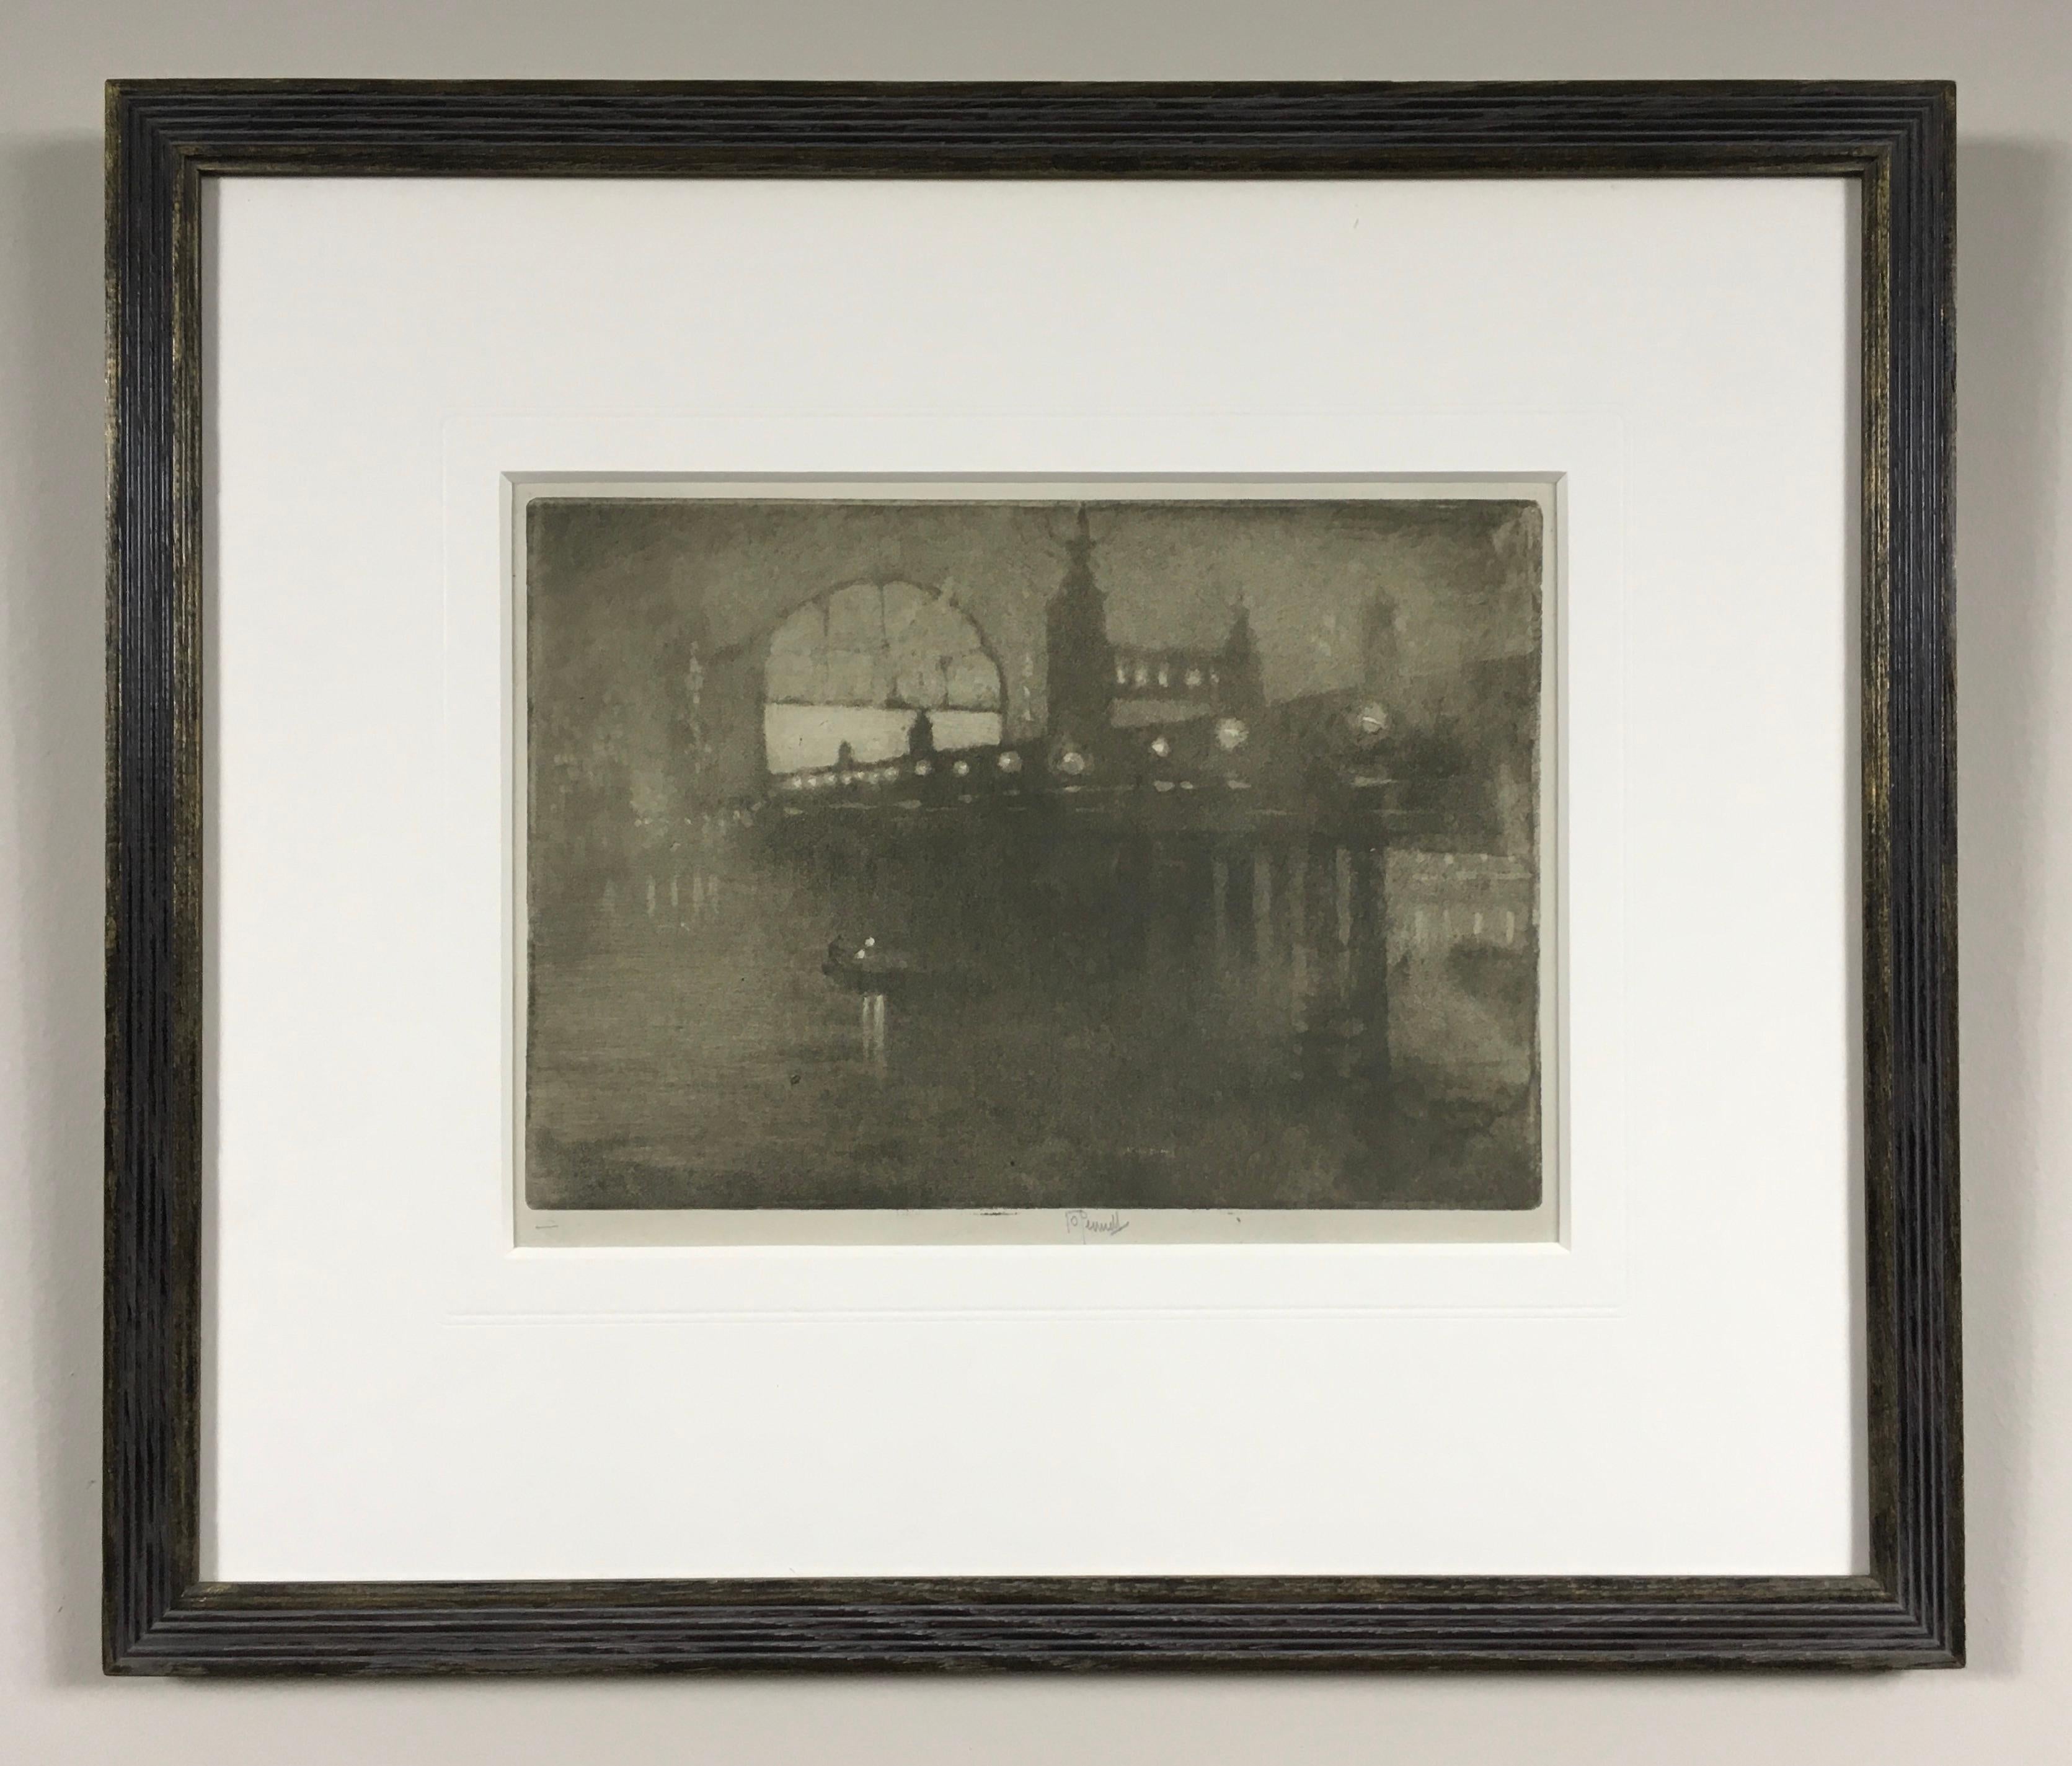 JOSEPH PENNELL
(1857-1926)

Charing Cross Bridge at Night, 1909

Signed
Etching

Plate size17.5 by 25 cm., 7 by 10 in.
(frame size 38.5 by 45 cm., 15 ¼ by 17 ¾ in.)

Pennell was born in Philadelphia where he studied at School of Industrial Art and